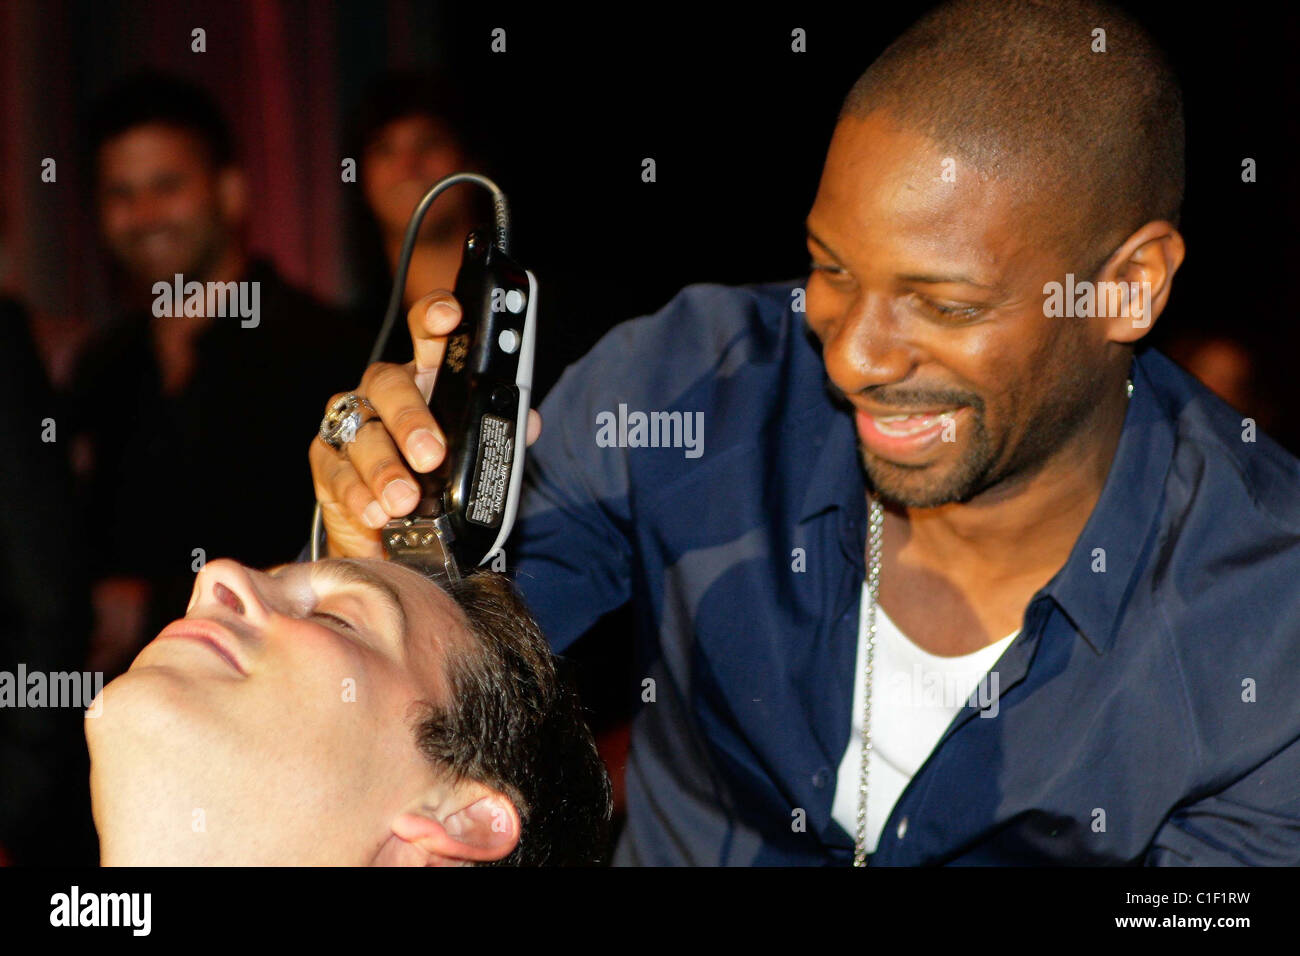 Alan Roth has his hair shaved off to benefit the Cystic Fibrosis Foundation at the Eleventh Annual Fashion Art Ball. DJ Irie Stock Photo